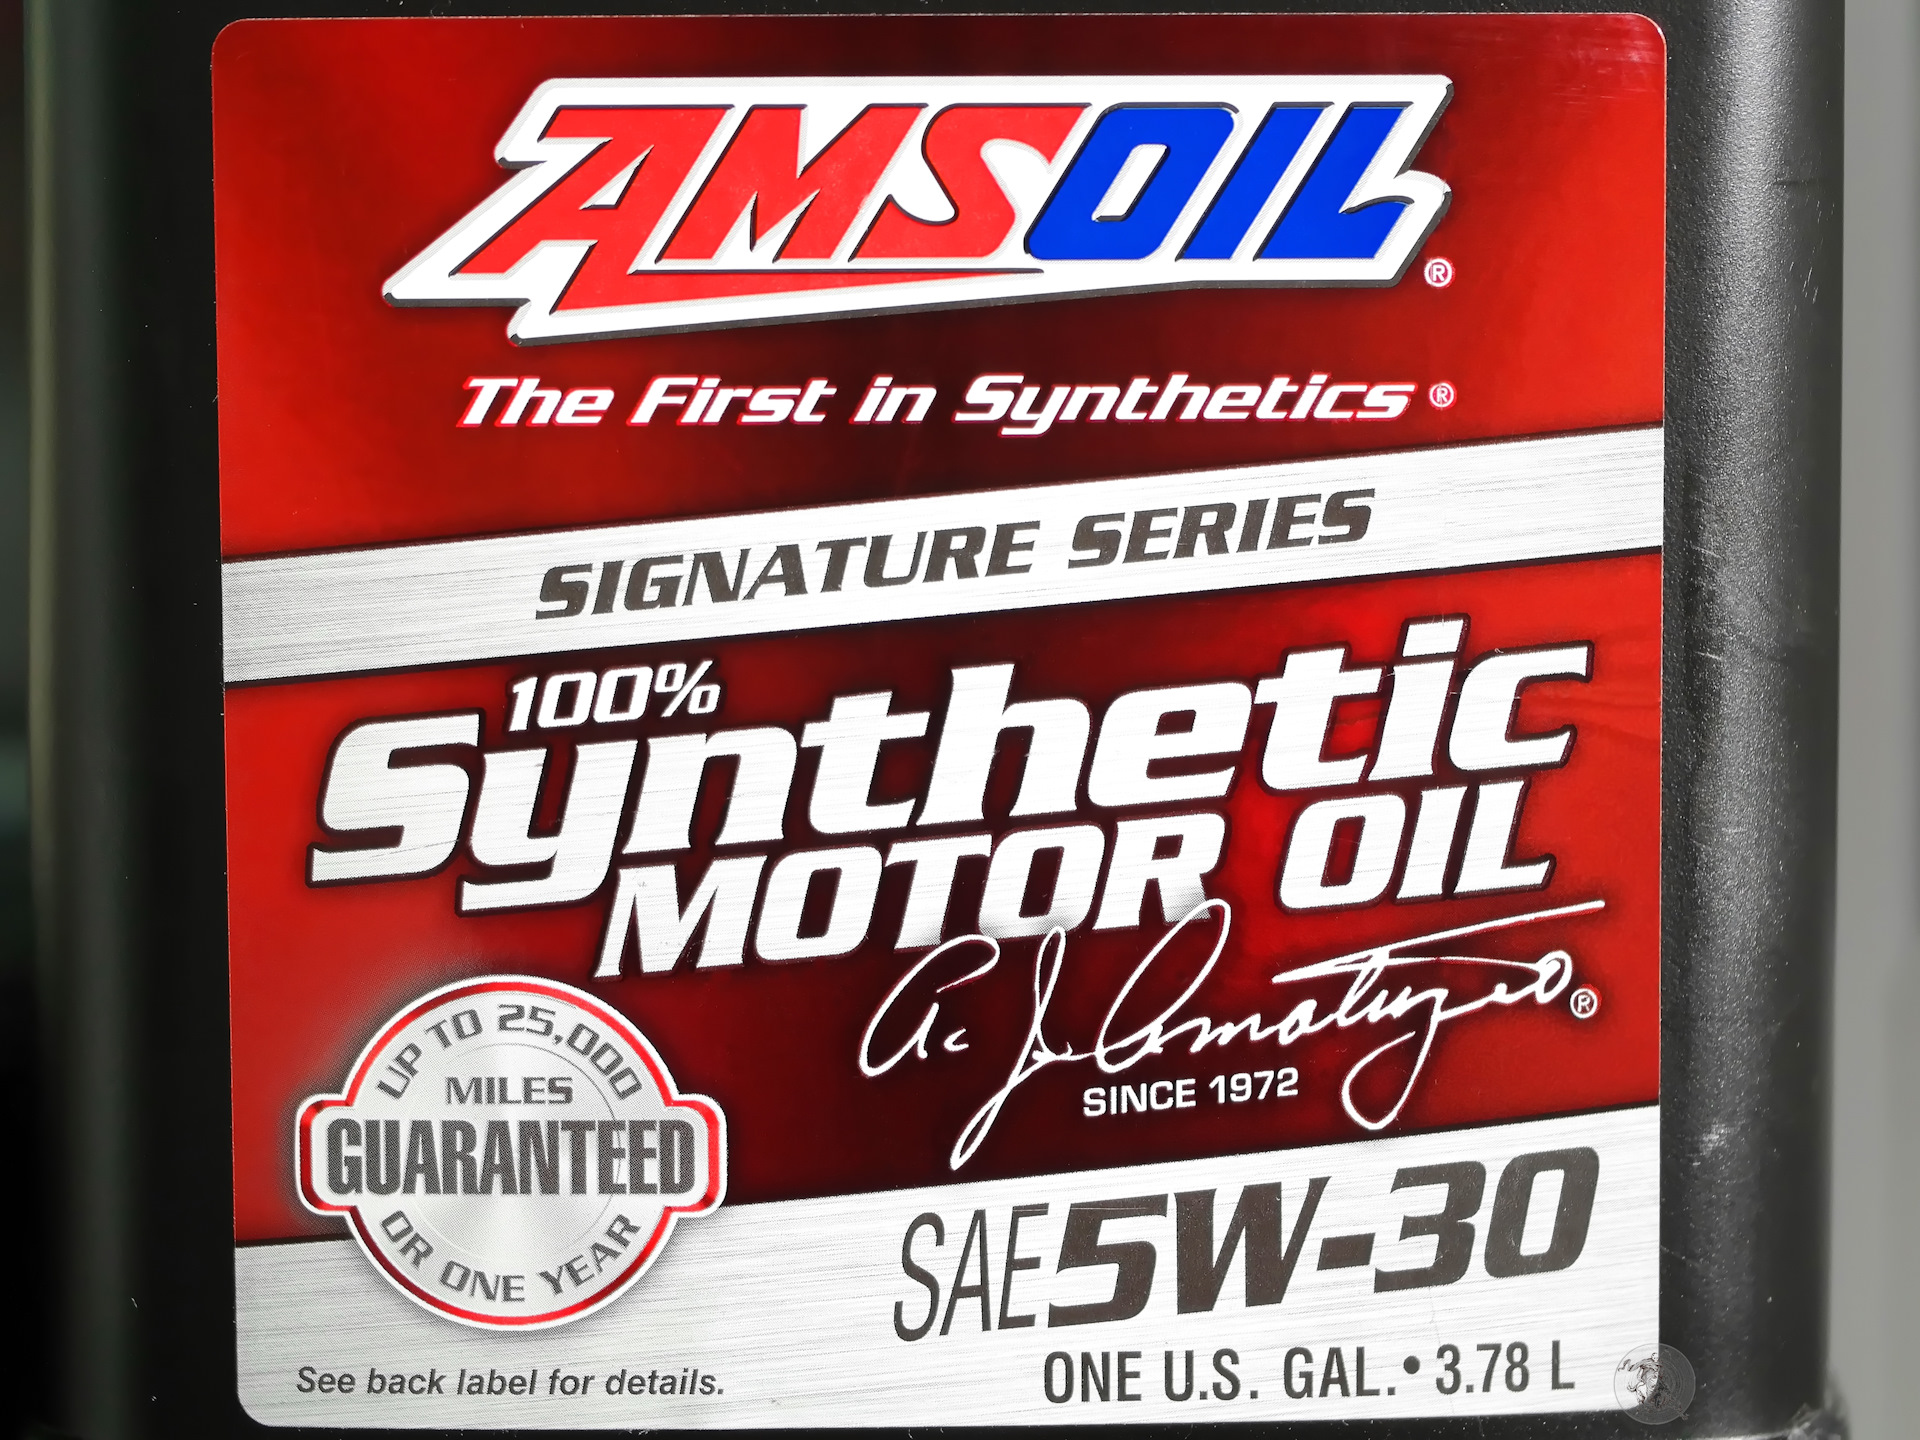 AMSOIL 5w30 Signature. AMSOIL Signature Series 5w-30. AMSOIL Signature Series Synthetic 5w-30. AMSOIL Signature Series 100% Synthetic 5w30 (asl1g),. Amsoil signature series synthetic